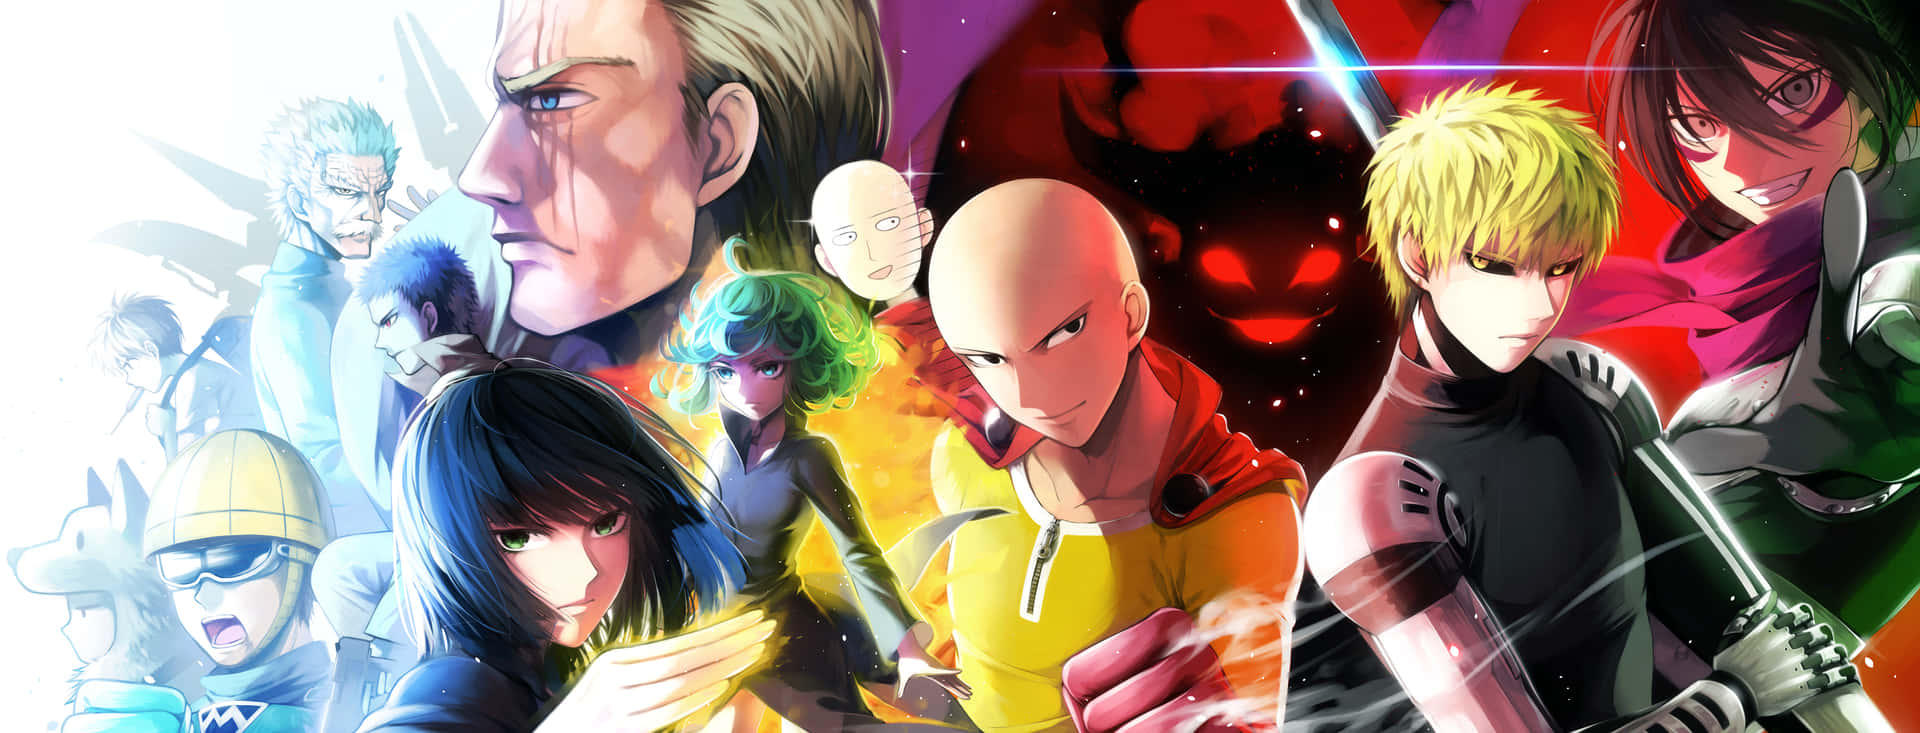 One Punch Man King - The Ultimate Fighter Wallpaper